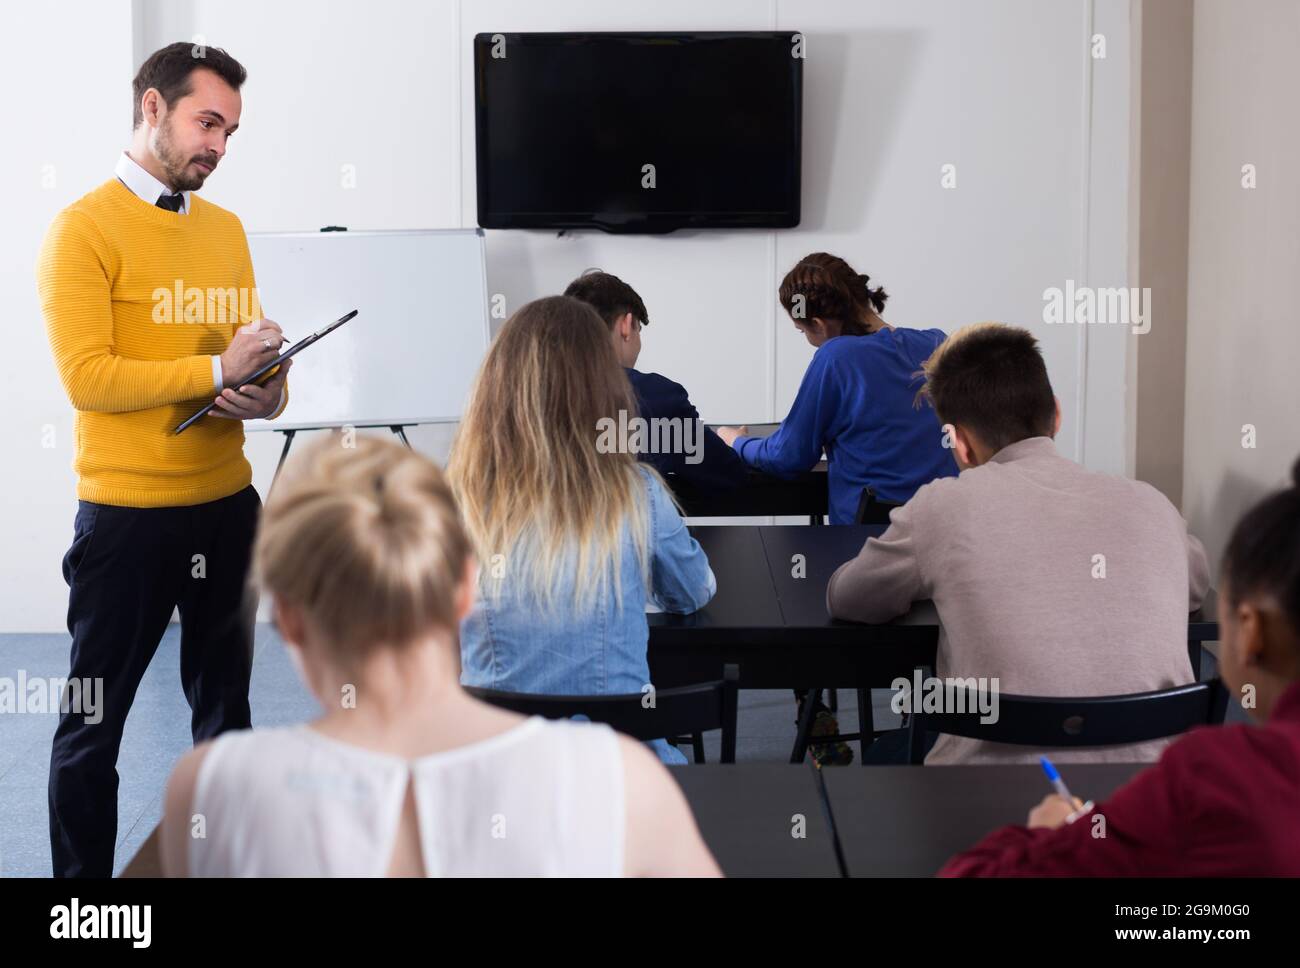 University teacher is monitoring students during revision work in class. Stock Photo